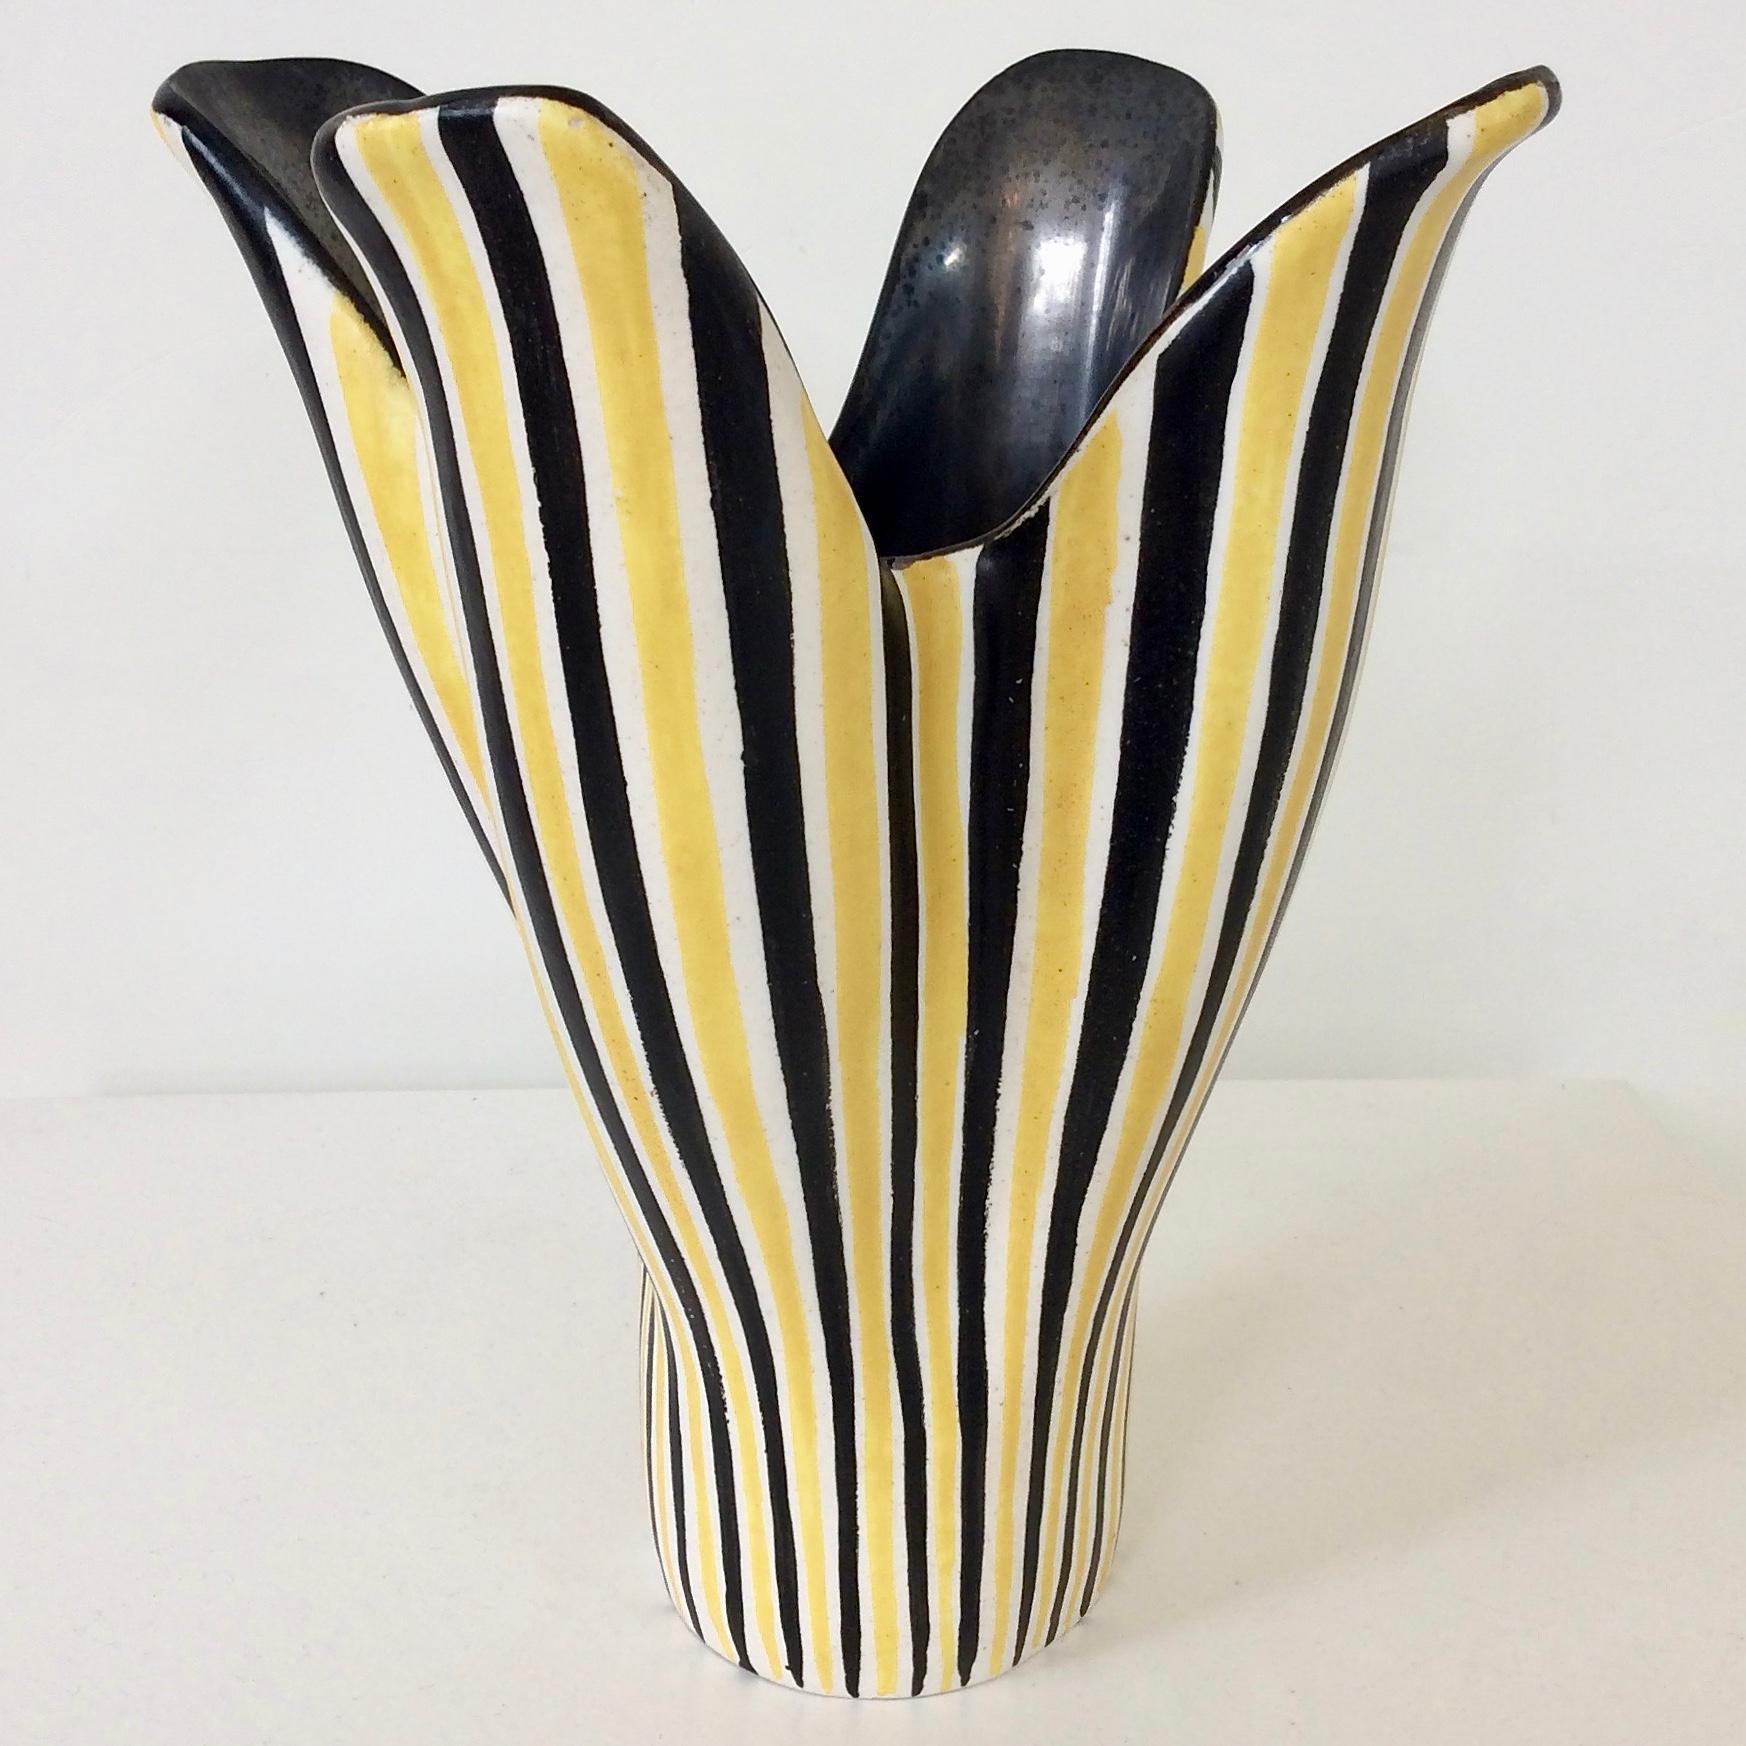 Elegant corolla vase, circa 1950, France.
Enameled ceramic stripped in white, black, yellow.
Black enamel inside.
Signed underneath.
Dimensions: 28 cm height, 24 cm diameter.
All purchases are covered by our Buyer Protection Guarantee.
This